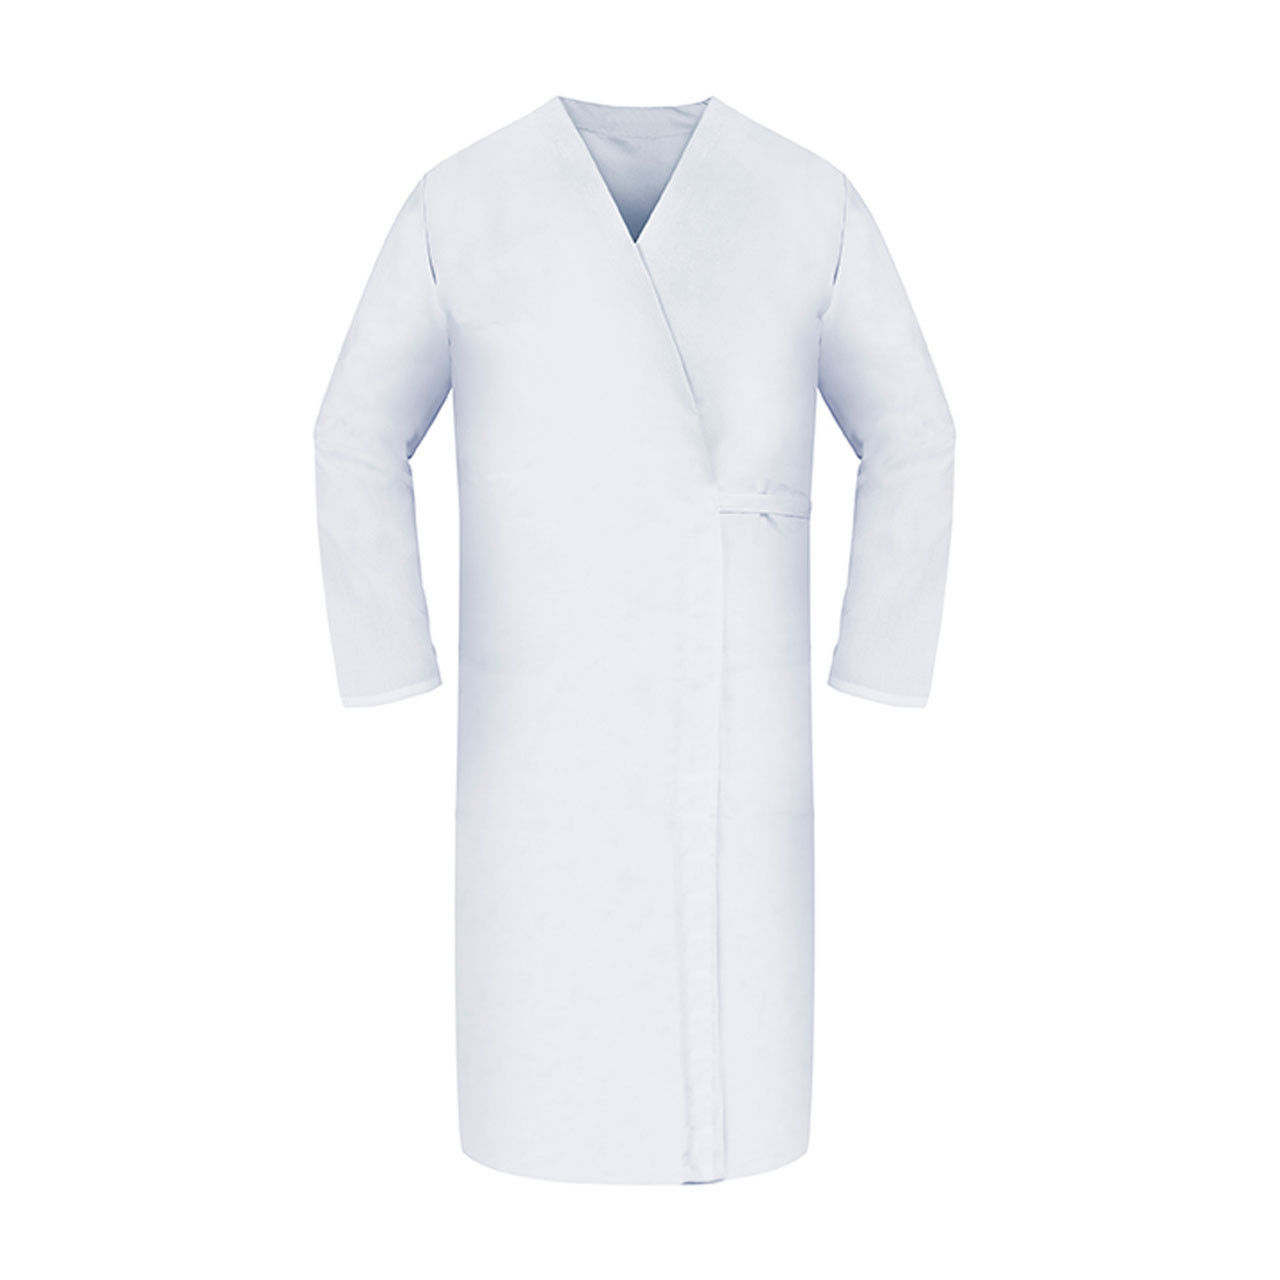 What type of weave does the white smock of the HACCP Smock Wrap, LS, White have?